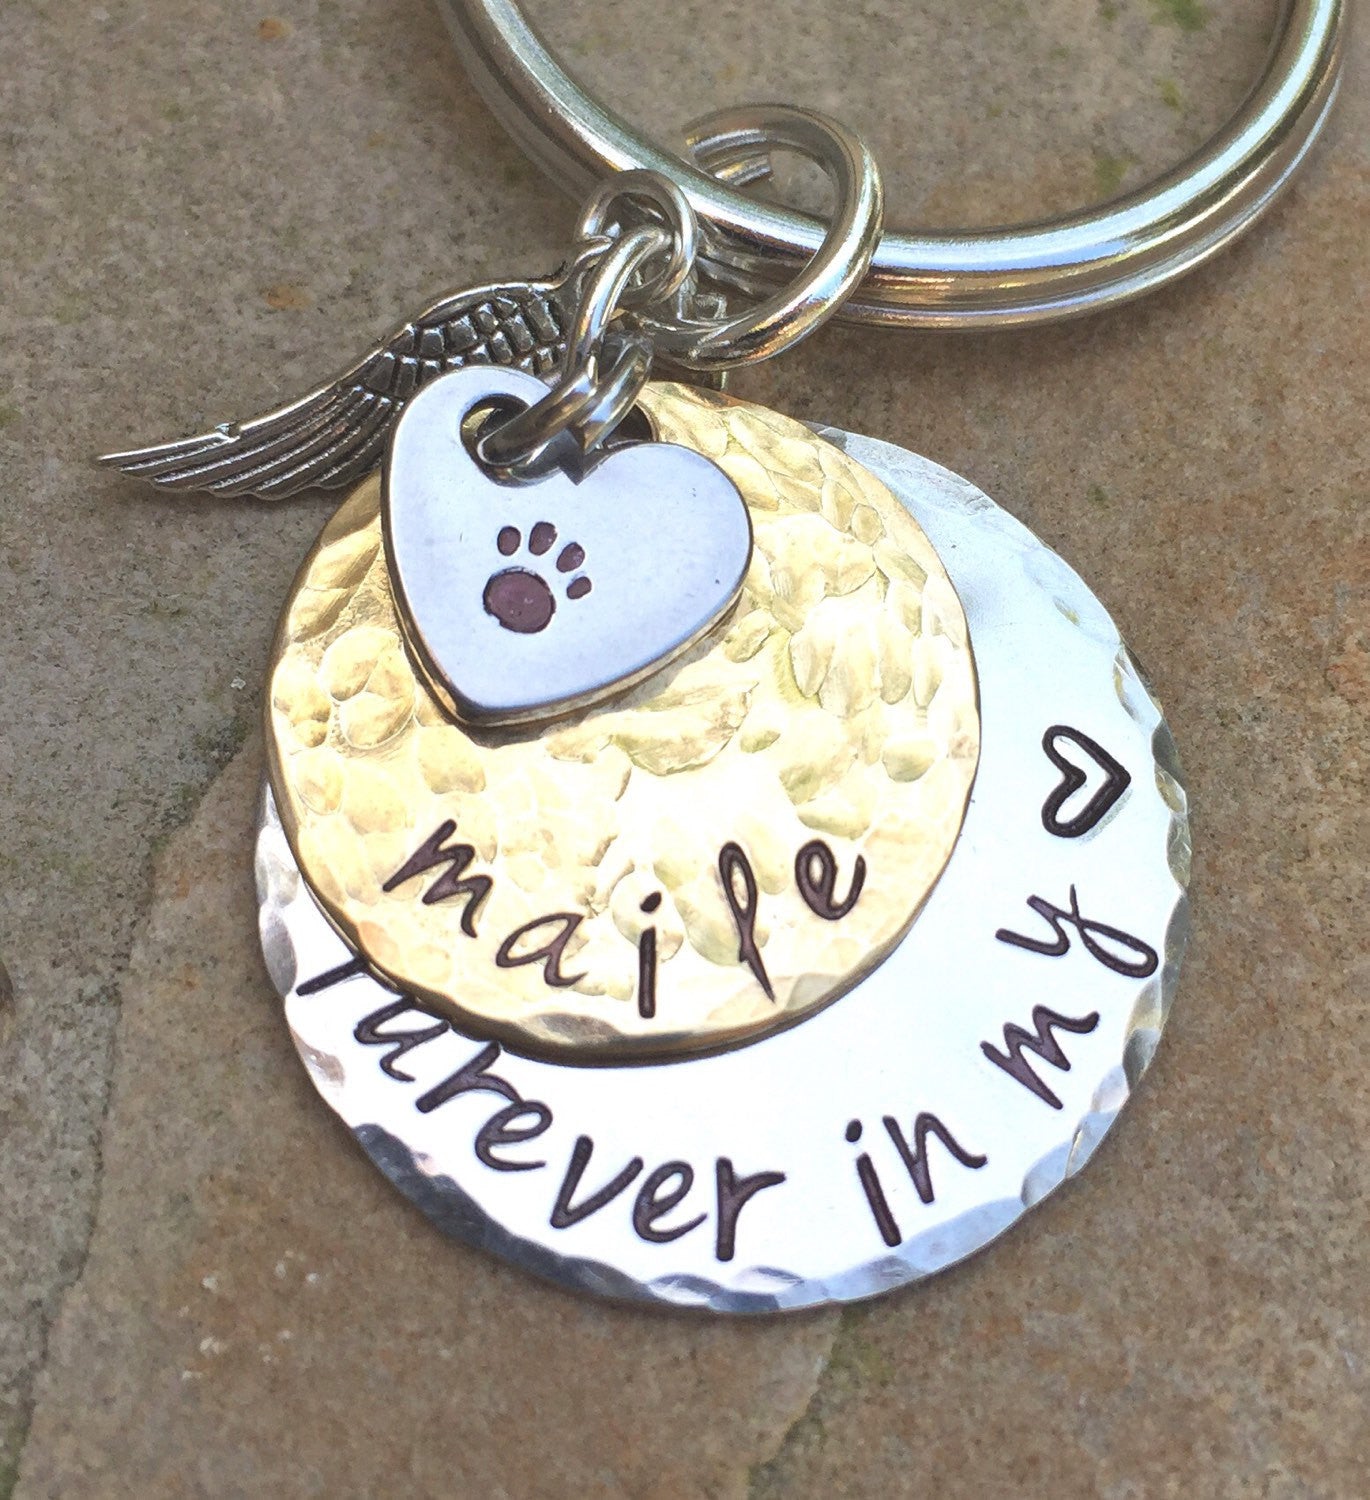 Furever in my heart, Pet Memorial, Furever in my heart Keychain, miss my pet, sympathy pet gift, natashaaloha - Natashaaloha, jewelry, bracelets, necklace, keychains, fishing lures, gifts for men, charms, personalized, 